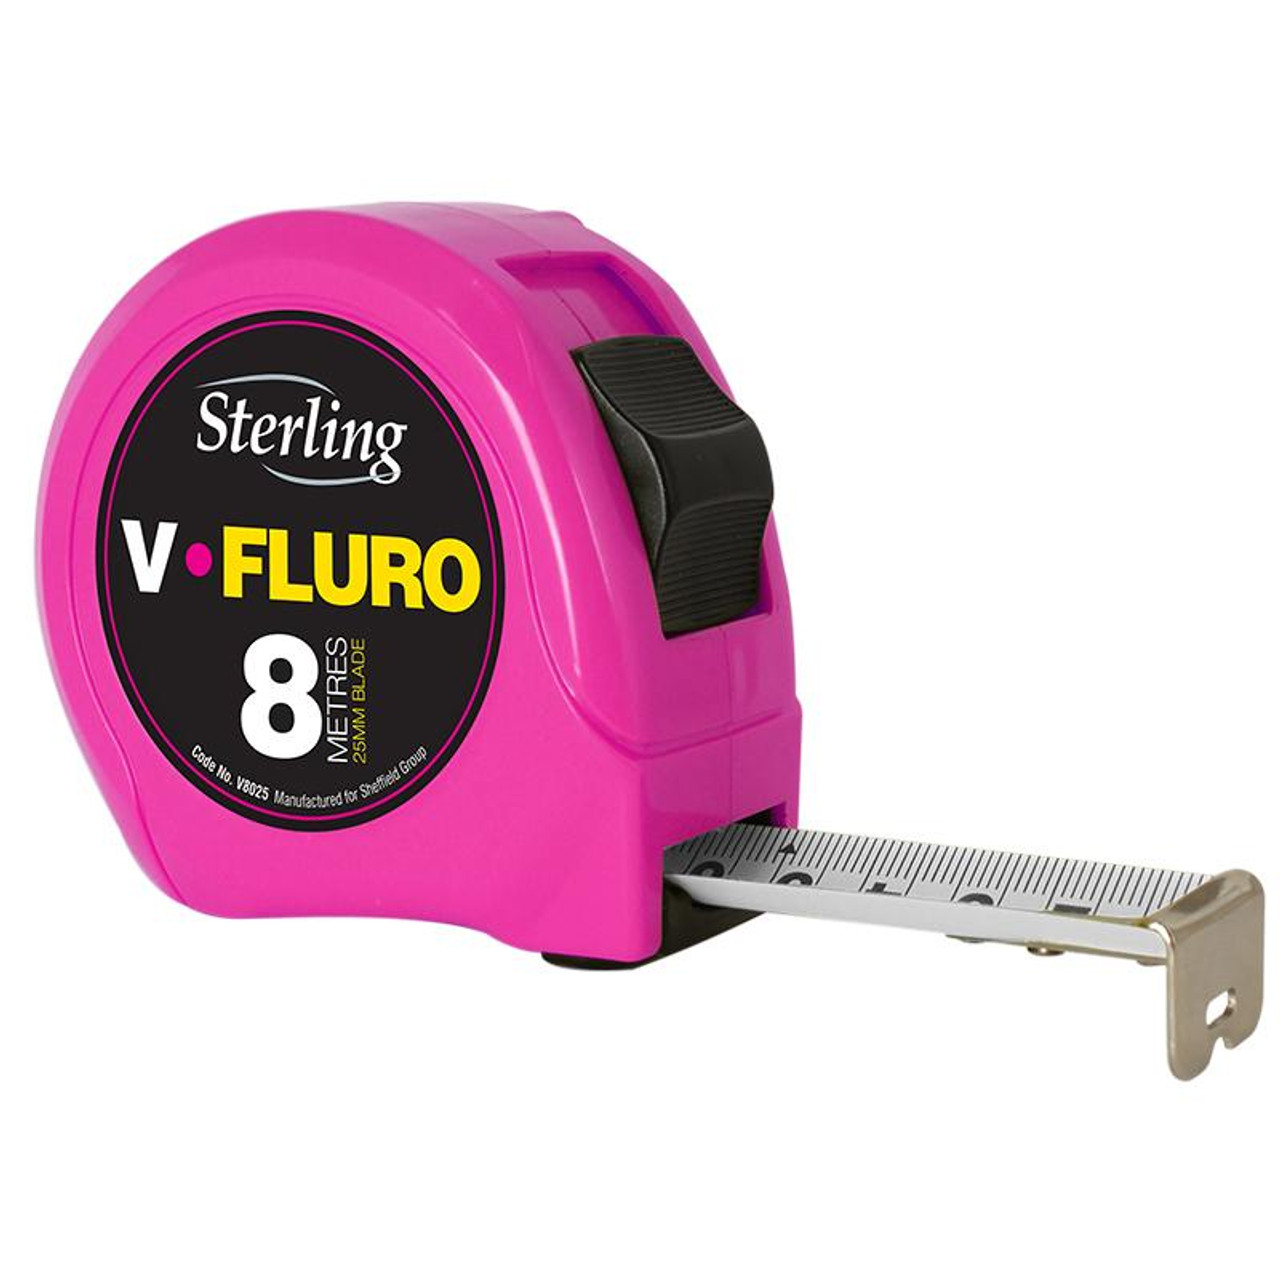 8m x 25mm V-Force Fluro Measuring Tape - Cost Less Bolts